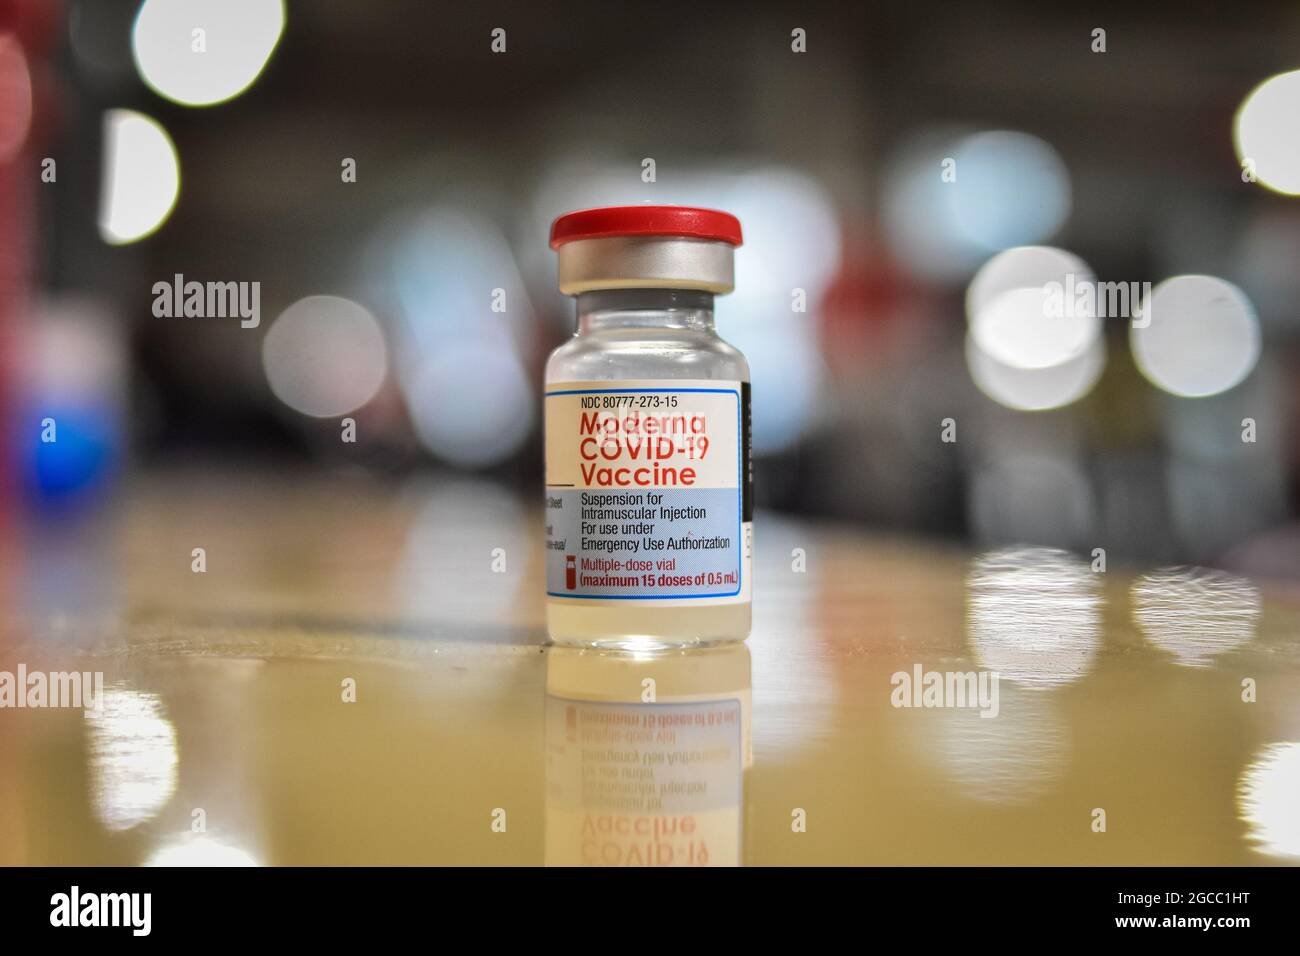 A vial of the Moderna COVID-19 Vaccine as people from ages 25 to 30 start their vaccination phase with the Moderna novel COVID-19 vaccine against the Coronavirus disease in Ipiales - Nariño, Colombia on August 2, 2021. Stock Photo